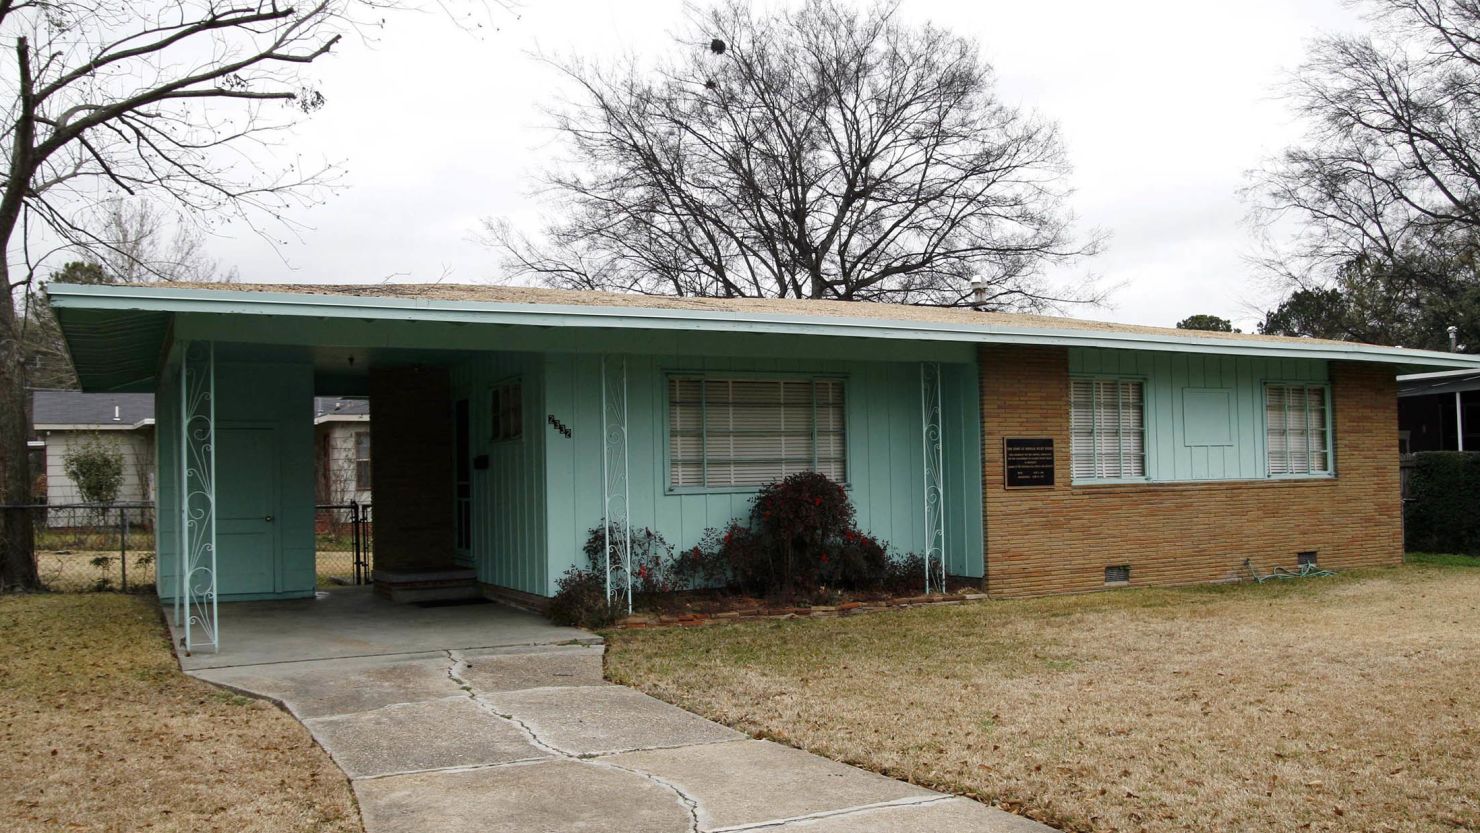 Mississippi Home Of Civil Rights Leader Medgar Evers Now A National Monument Cnn